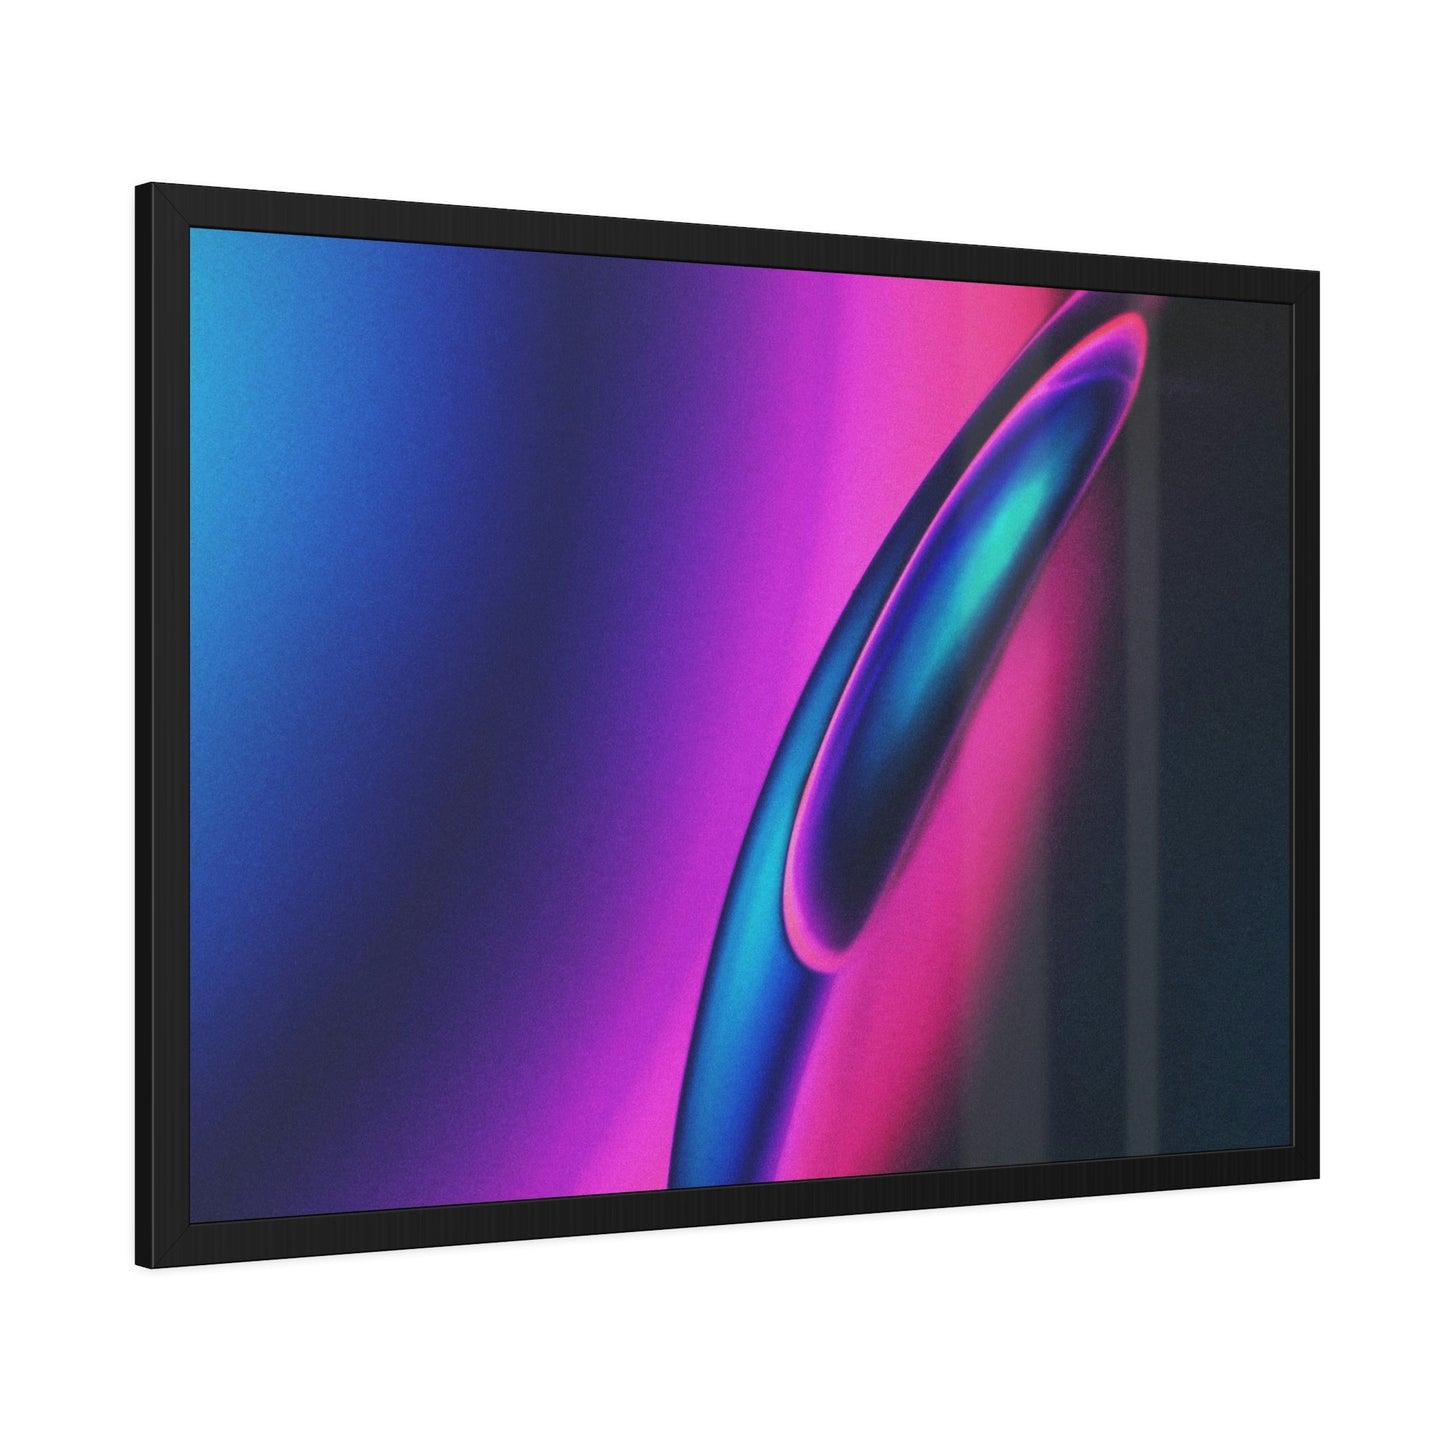 Neon Ecstasy Revealed: Neon-themed Wall Art Prints on High-Quality Canvas & Poster